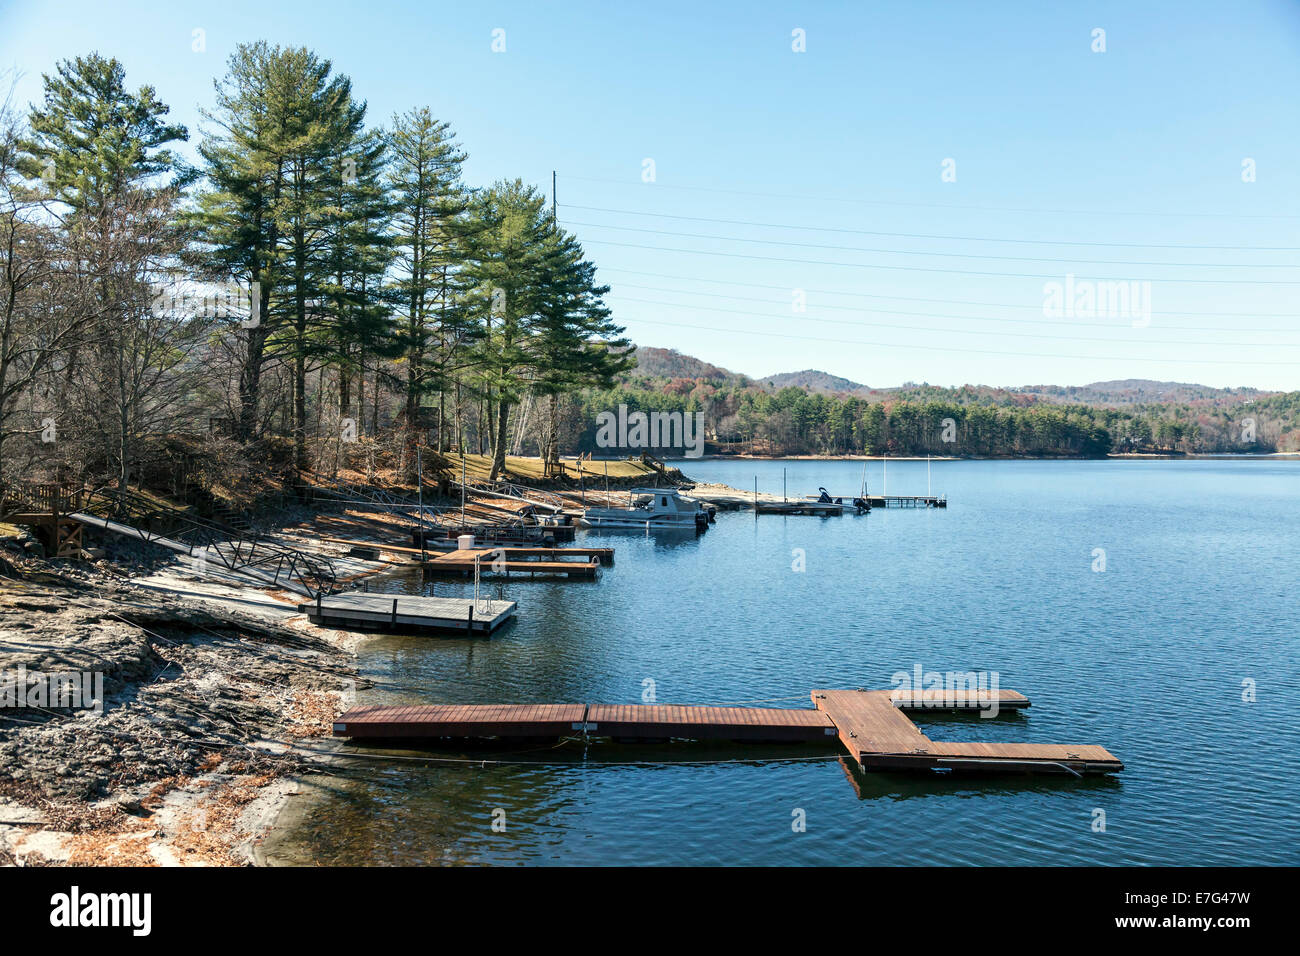 Wooden floating docks and boats along the shore of Lake Glenville near Cashiers, North Carolina on an autumn afternoon. Stock Photo